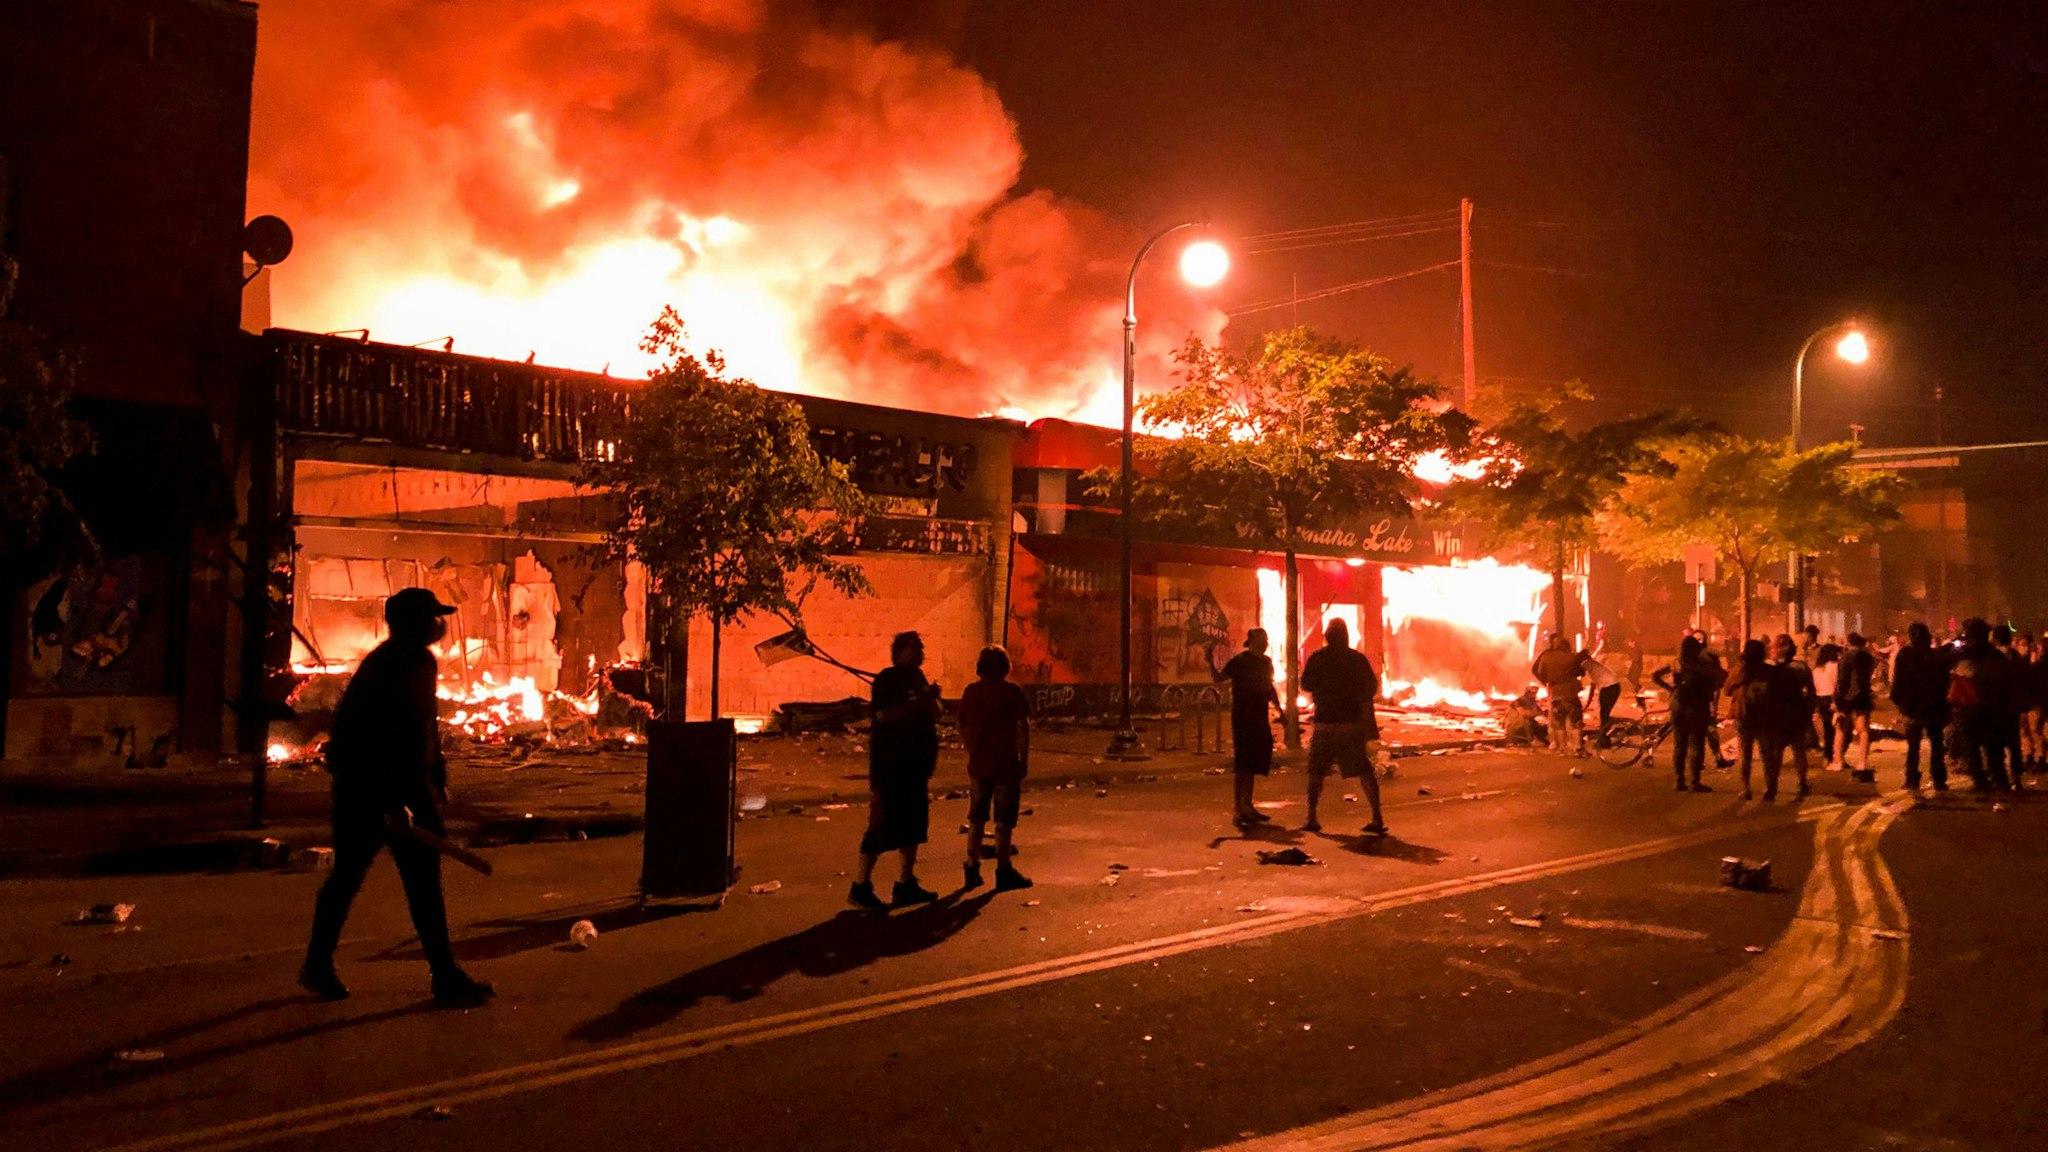 TOPSHOT - Flames rise from a liquor store and shops near the Third Police Precinct on May 28, 2020 in Minneapolis, Minnesota, during a protest over the death of George Floyd, an unarmed black man, who died after a police officer kneeled on his neck for several minutes. - A police precinct in Minnesota went up in flames late on May 28 in a third day of demonstrations as the so-called Twin Cities of Minneapolis and St. Paul seethed over the shocking police killing of a handcuffed black man. The precinct, which police had abandoned, burned after a group of protesters pushed through barriers around the building, breaking windows and chanting slogans. A much larger crowd demonstrated as the building went up in flames.